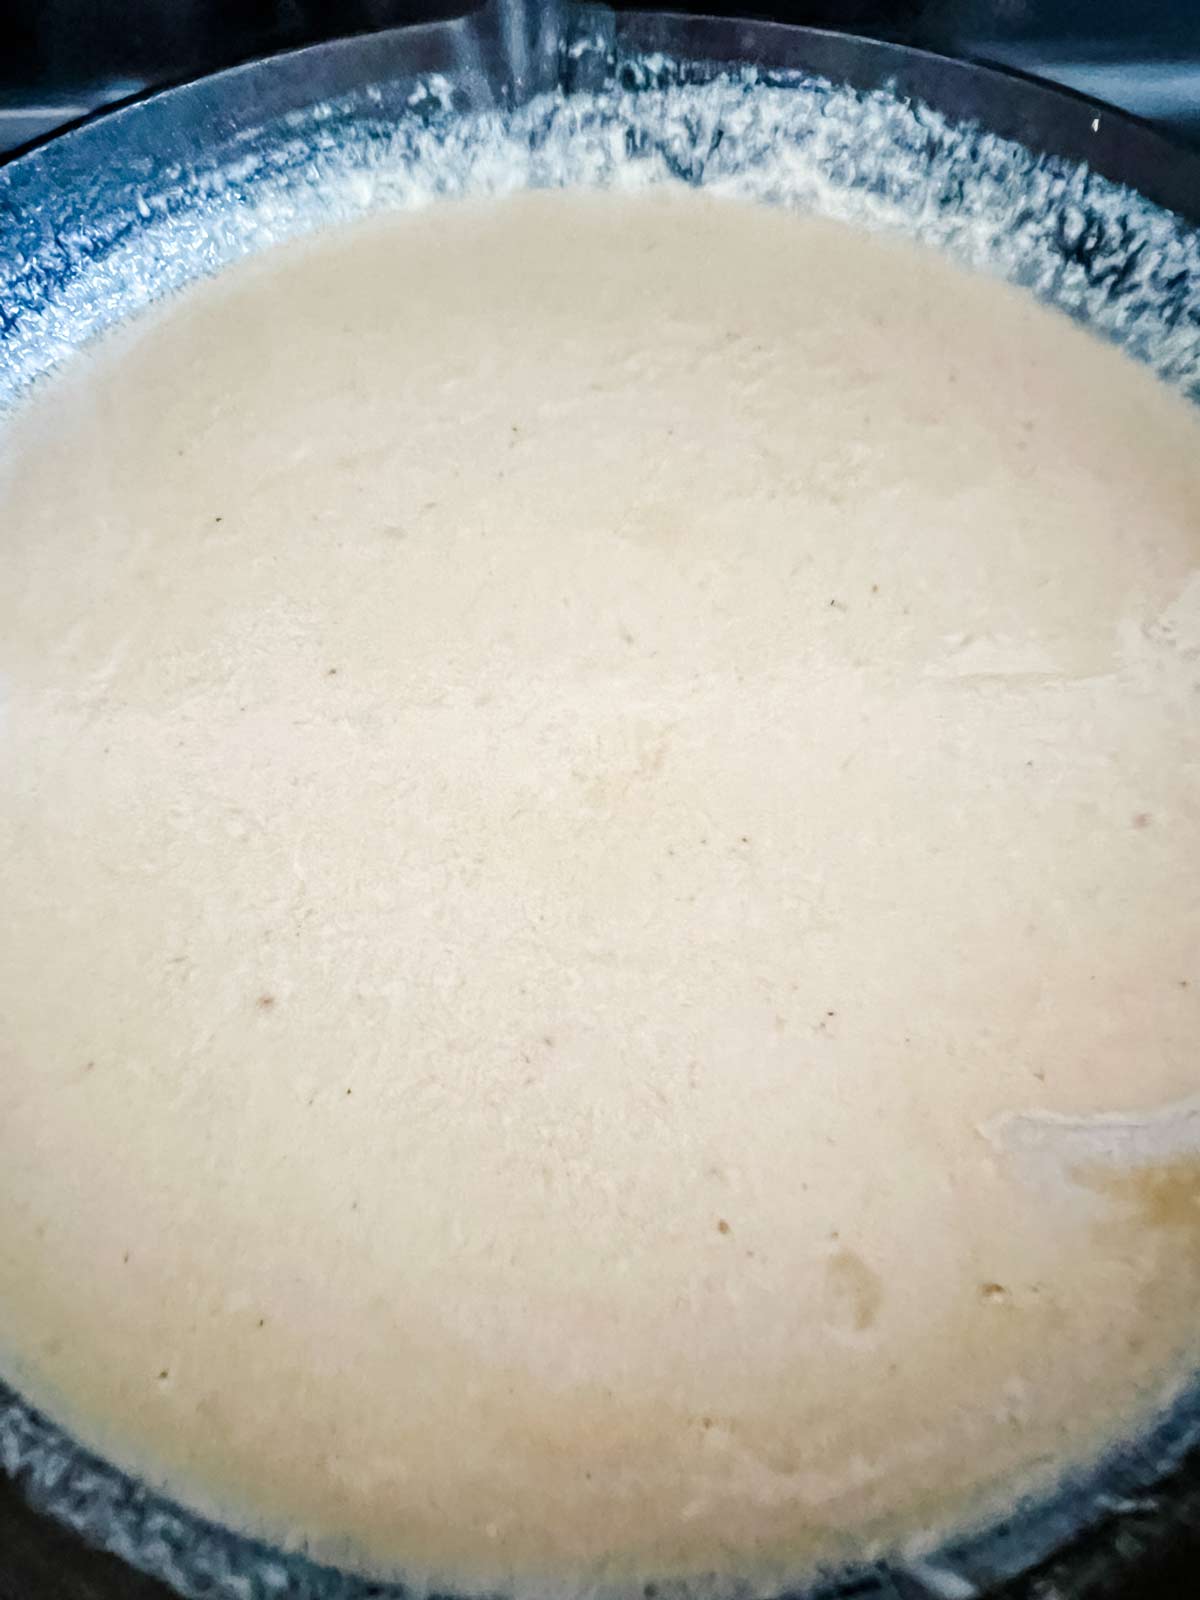 A cheesy white cream sauce in a cast iron skillet.